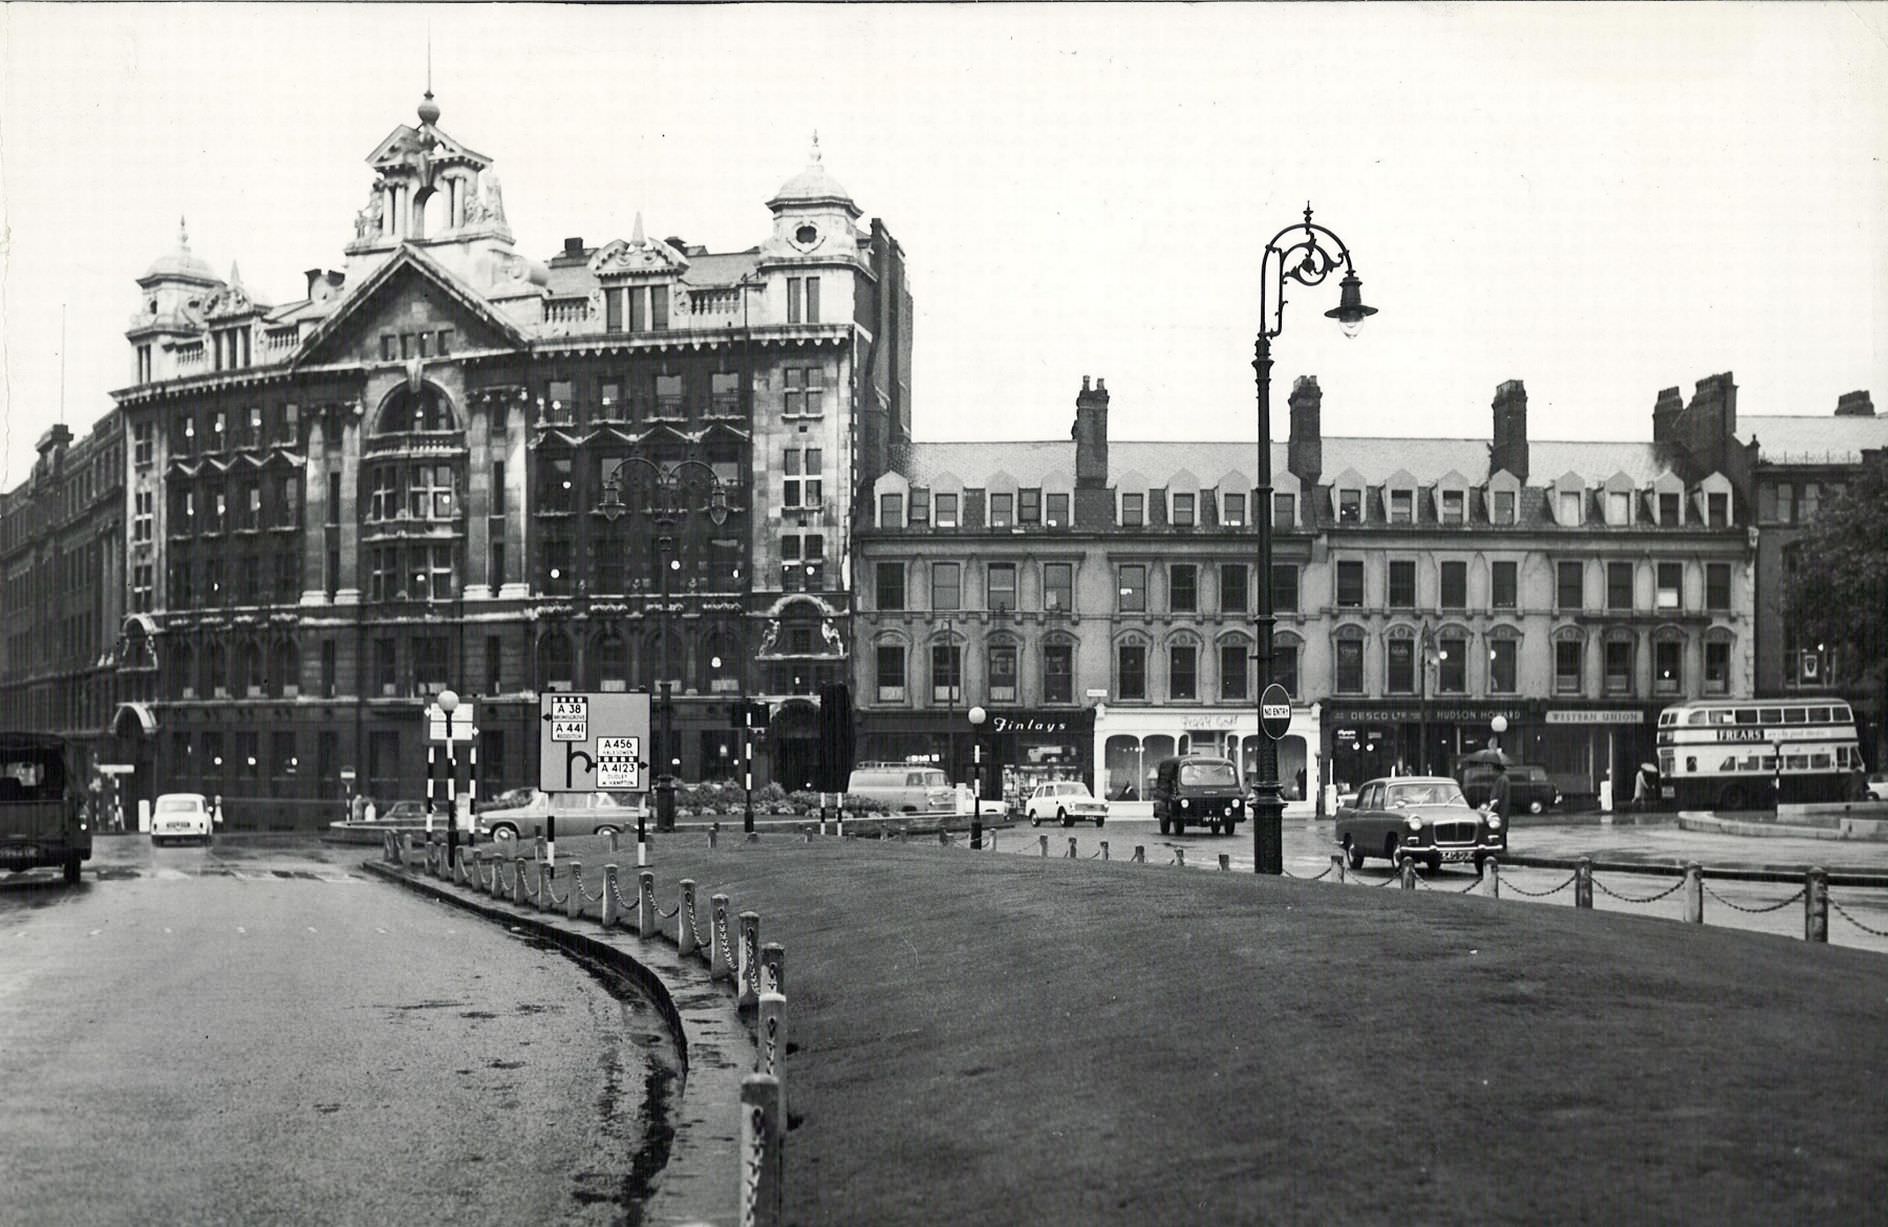 317-332 Broad Street and 38-44 Easy Row in Birmingham City Centre, in 1962.